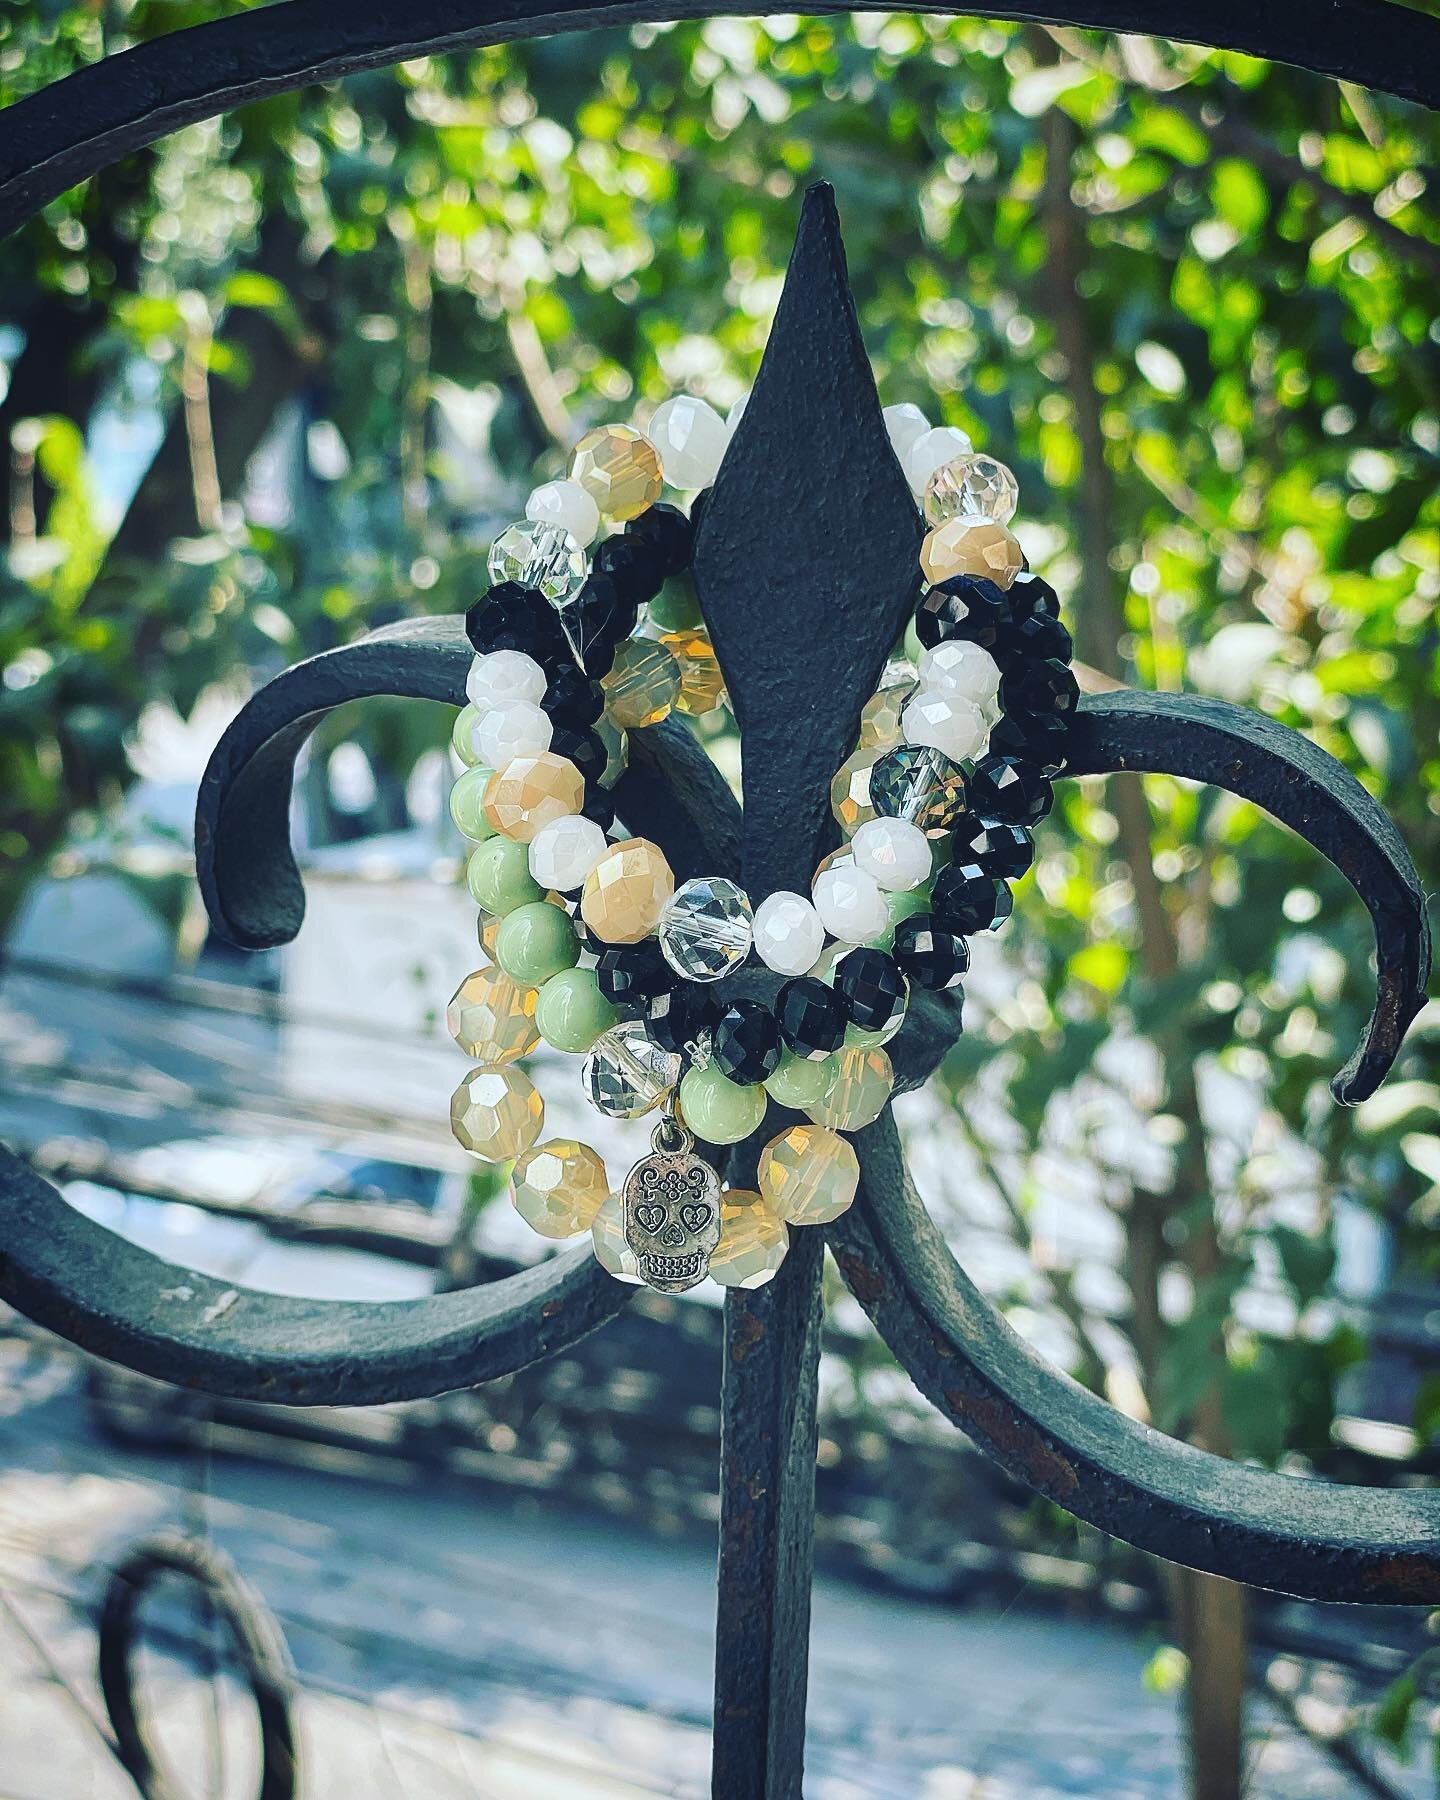 🧭 Wandering into the weekend... 

➡️ Get your @wanderchains Etsy orders in today by following link in bio. If wanting a custom chain, send me a DM.

#madetoorder #customdesigns #etsysmallbusiness #turninglemonsintolemonade #mexicocityofficial #bohos